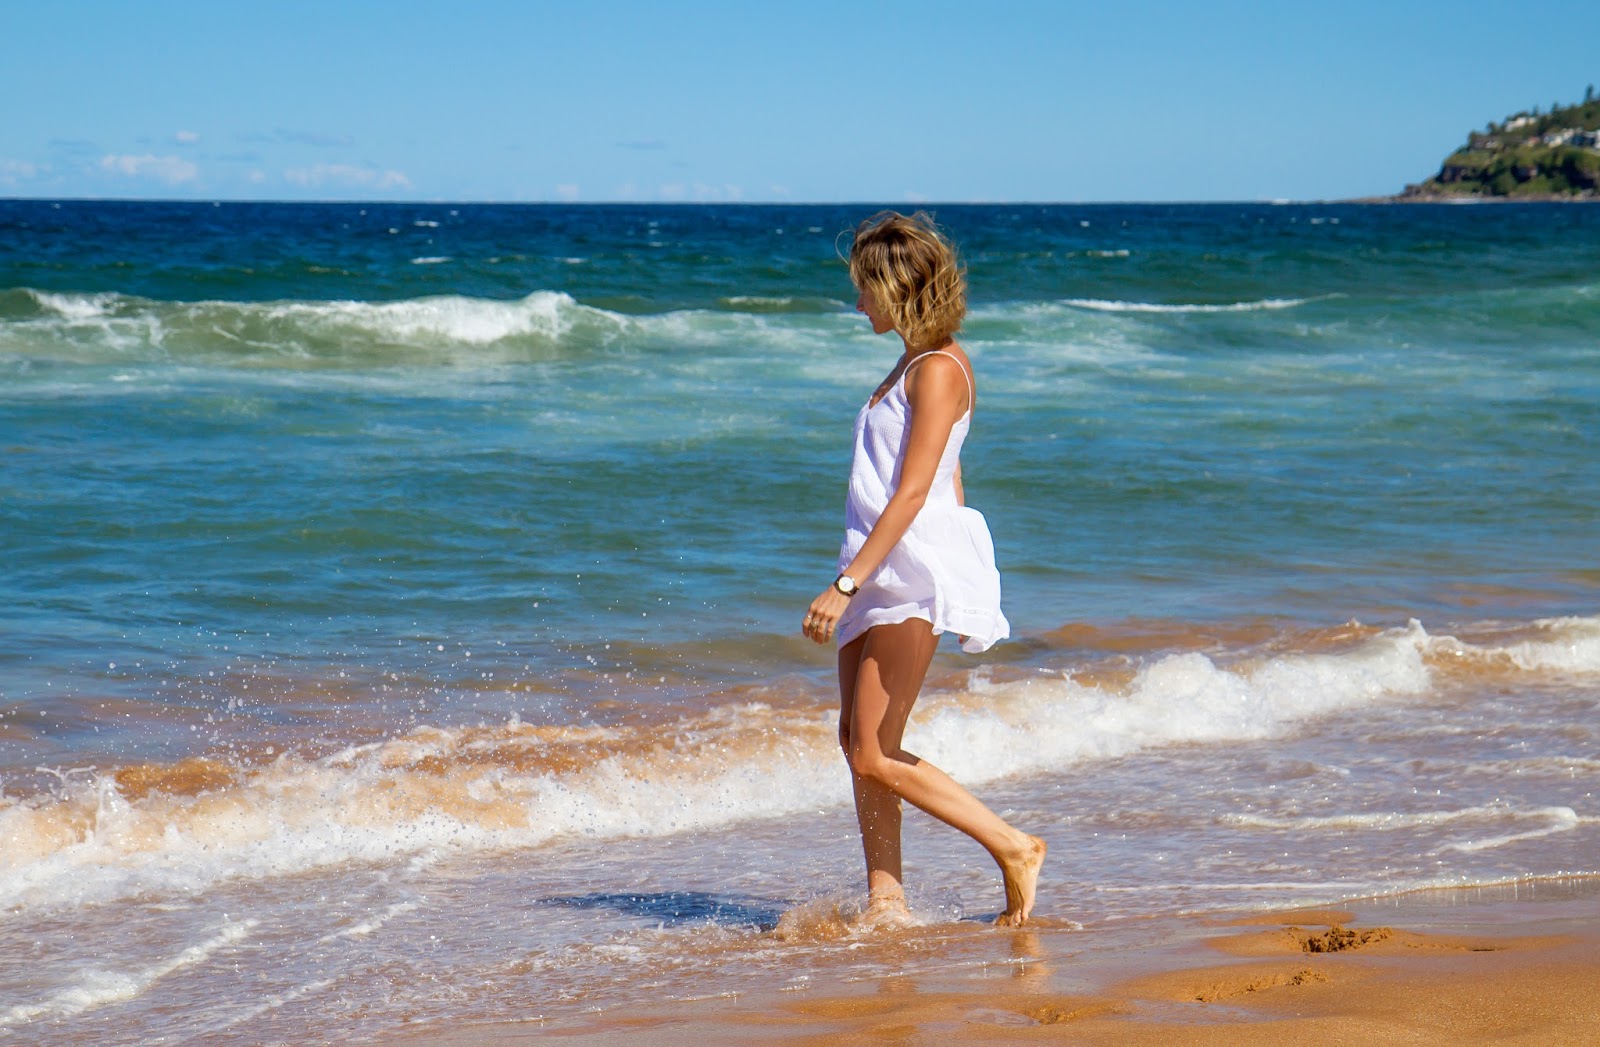 fashion and travel blogger, alison hutchinson from Styling My Life is playing in the waves at Palm Beach in Sydney, Aystralia in a white Zara sundress.